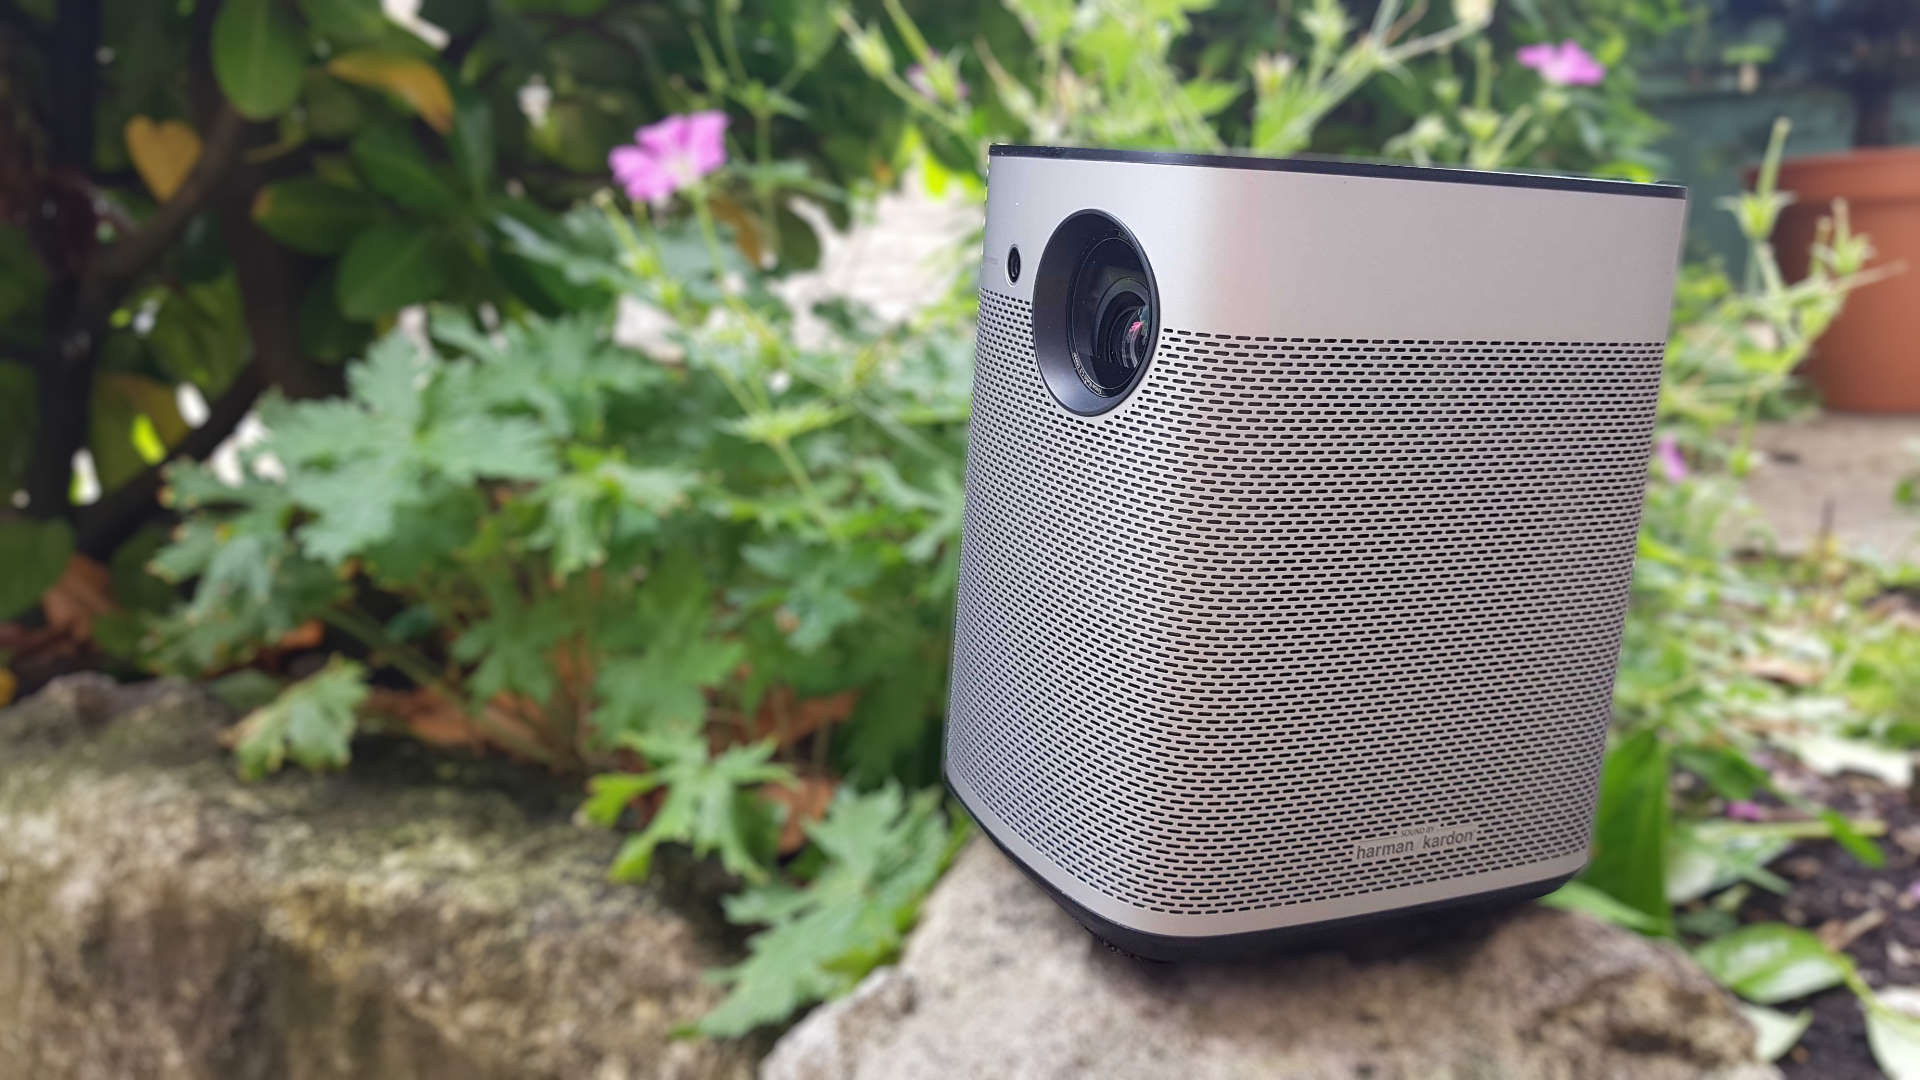  Xgimi Halo portable projector review 